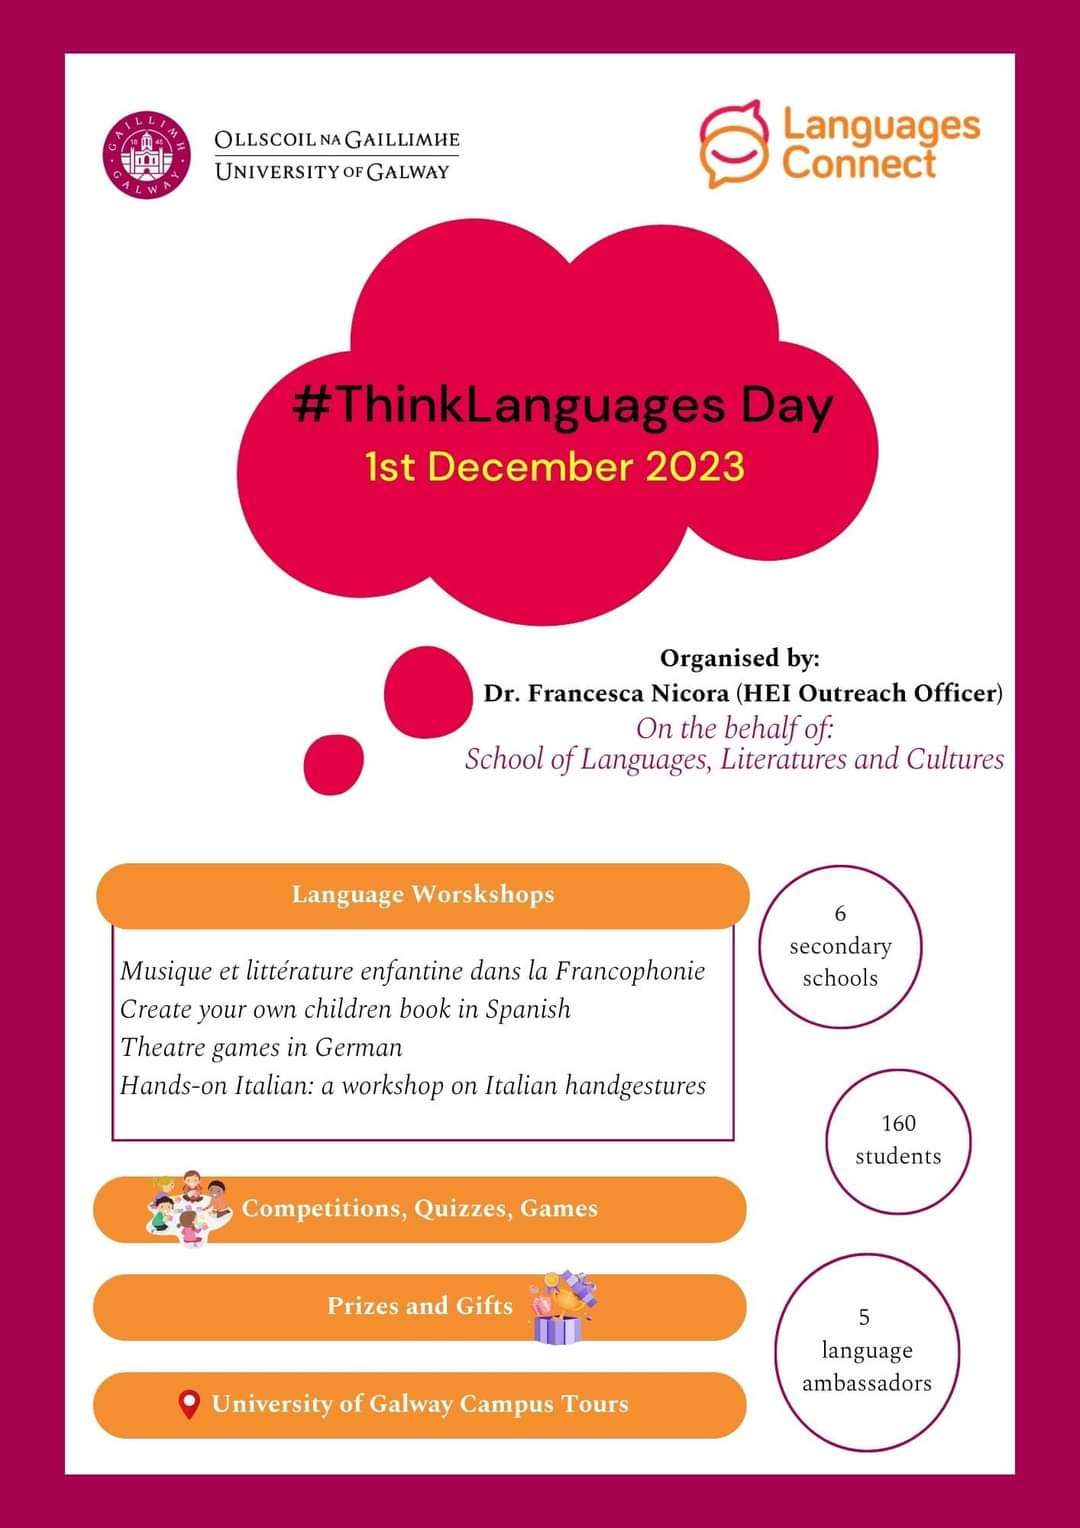 #ThinkLanguages Day on the 1st of December